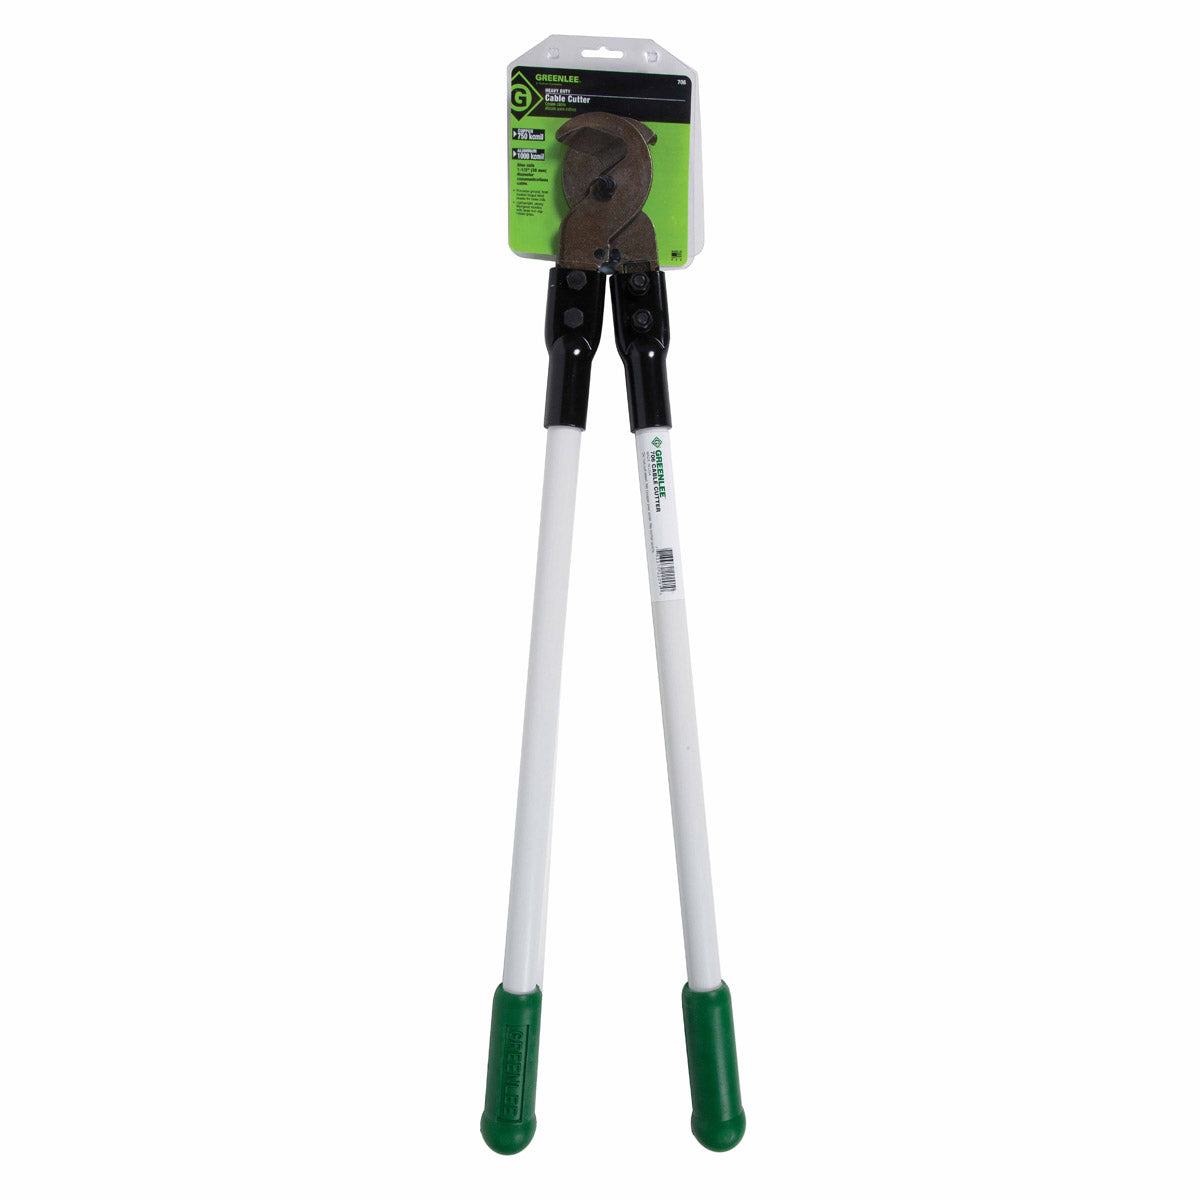 Greenlee 706 Heavy-Duty Cable Cutter 750kcmil (MCM)